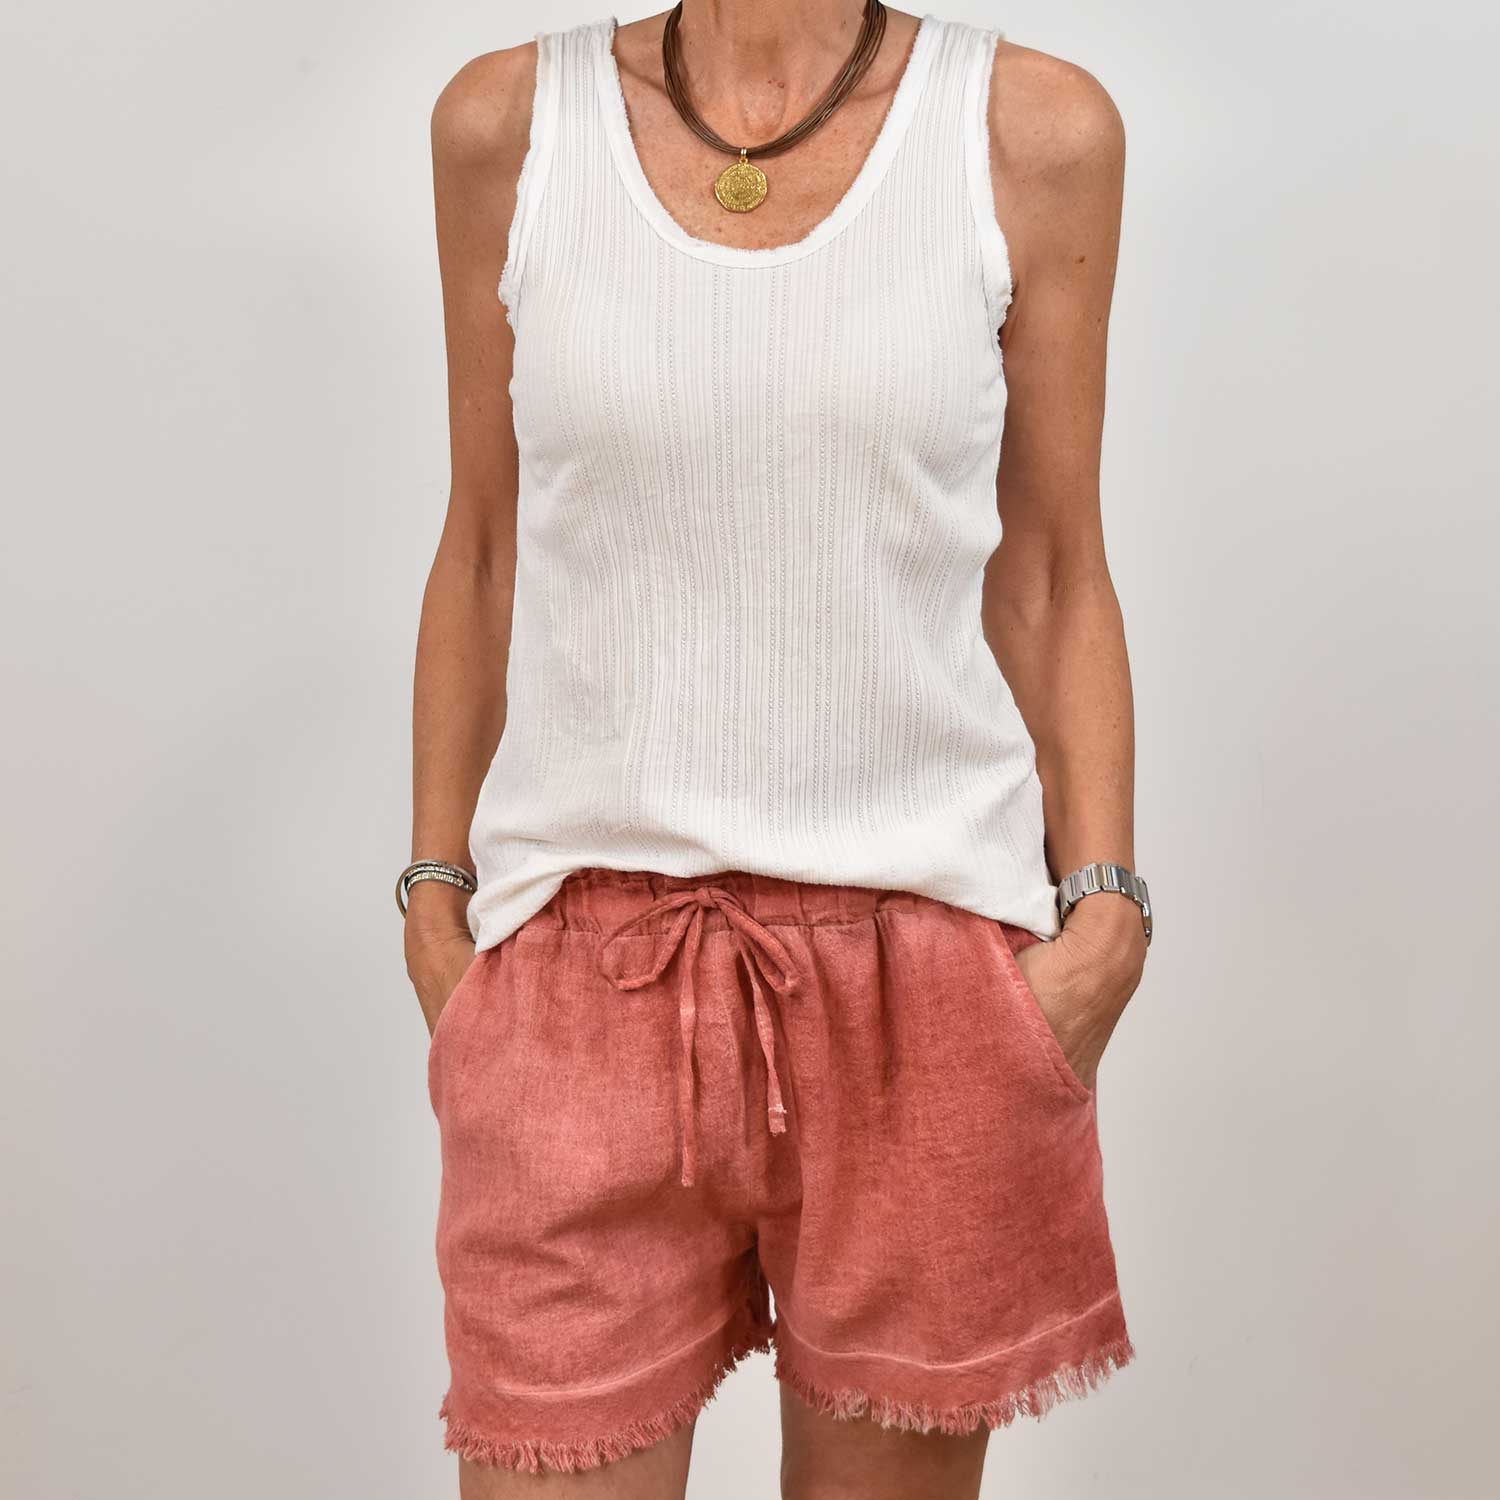 Red frayed shorts